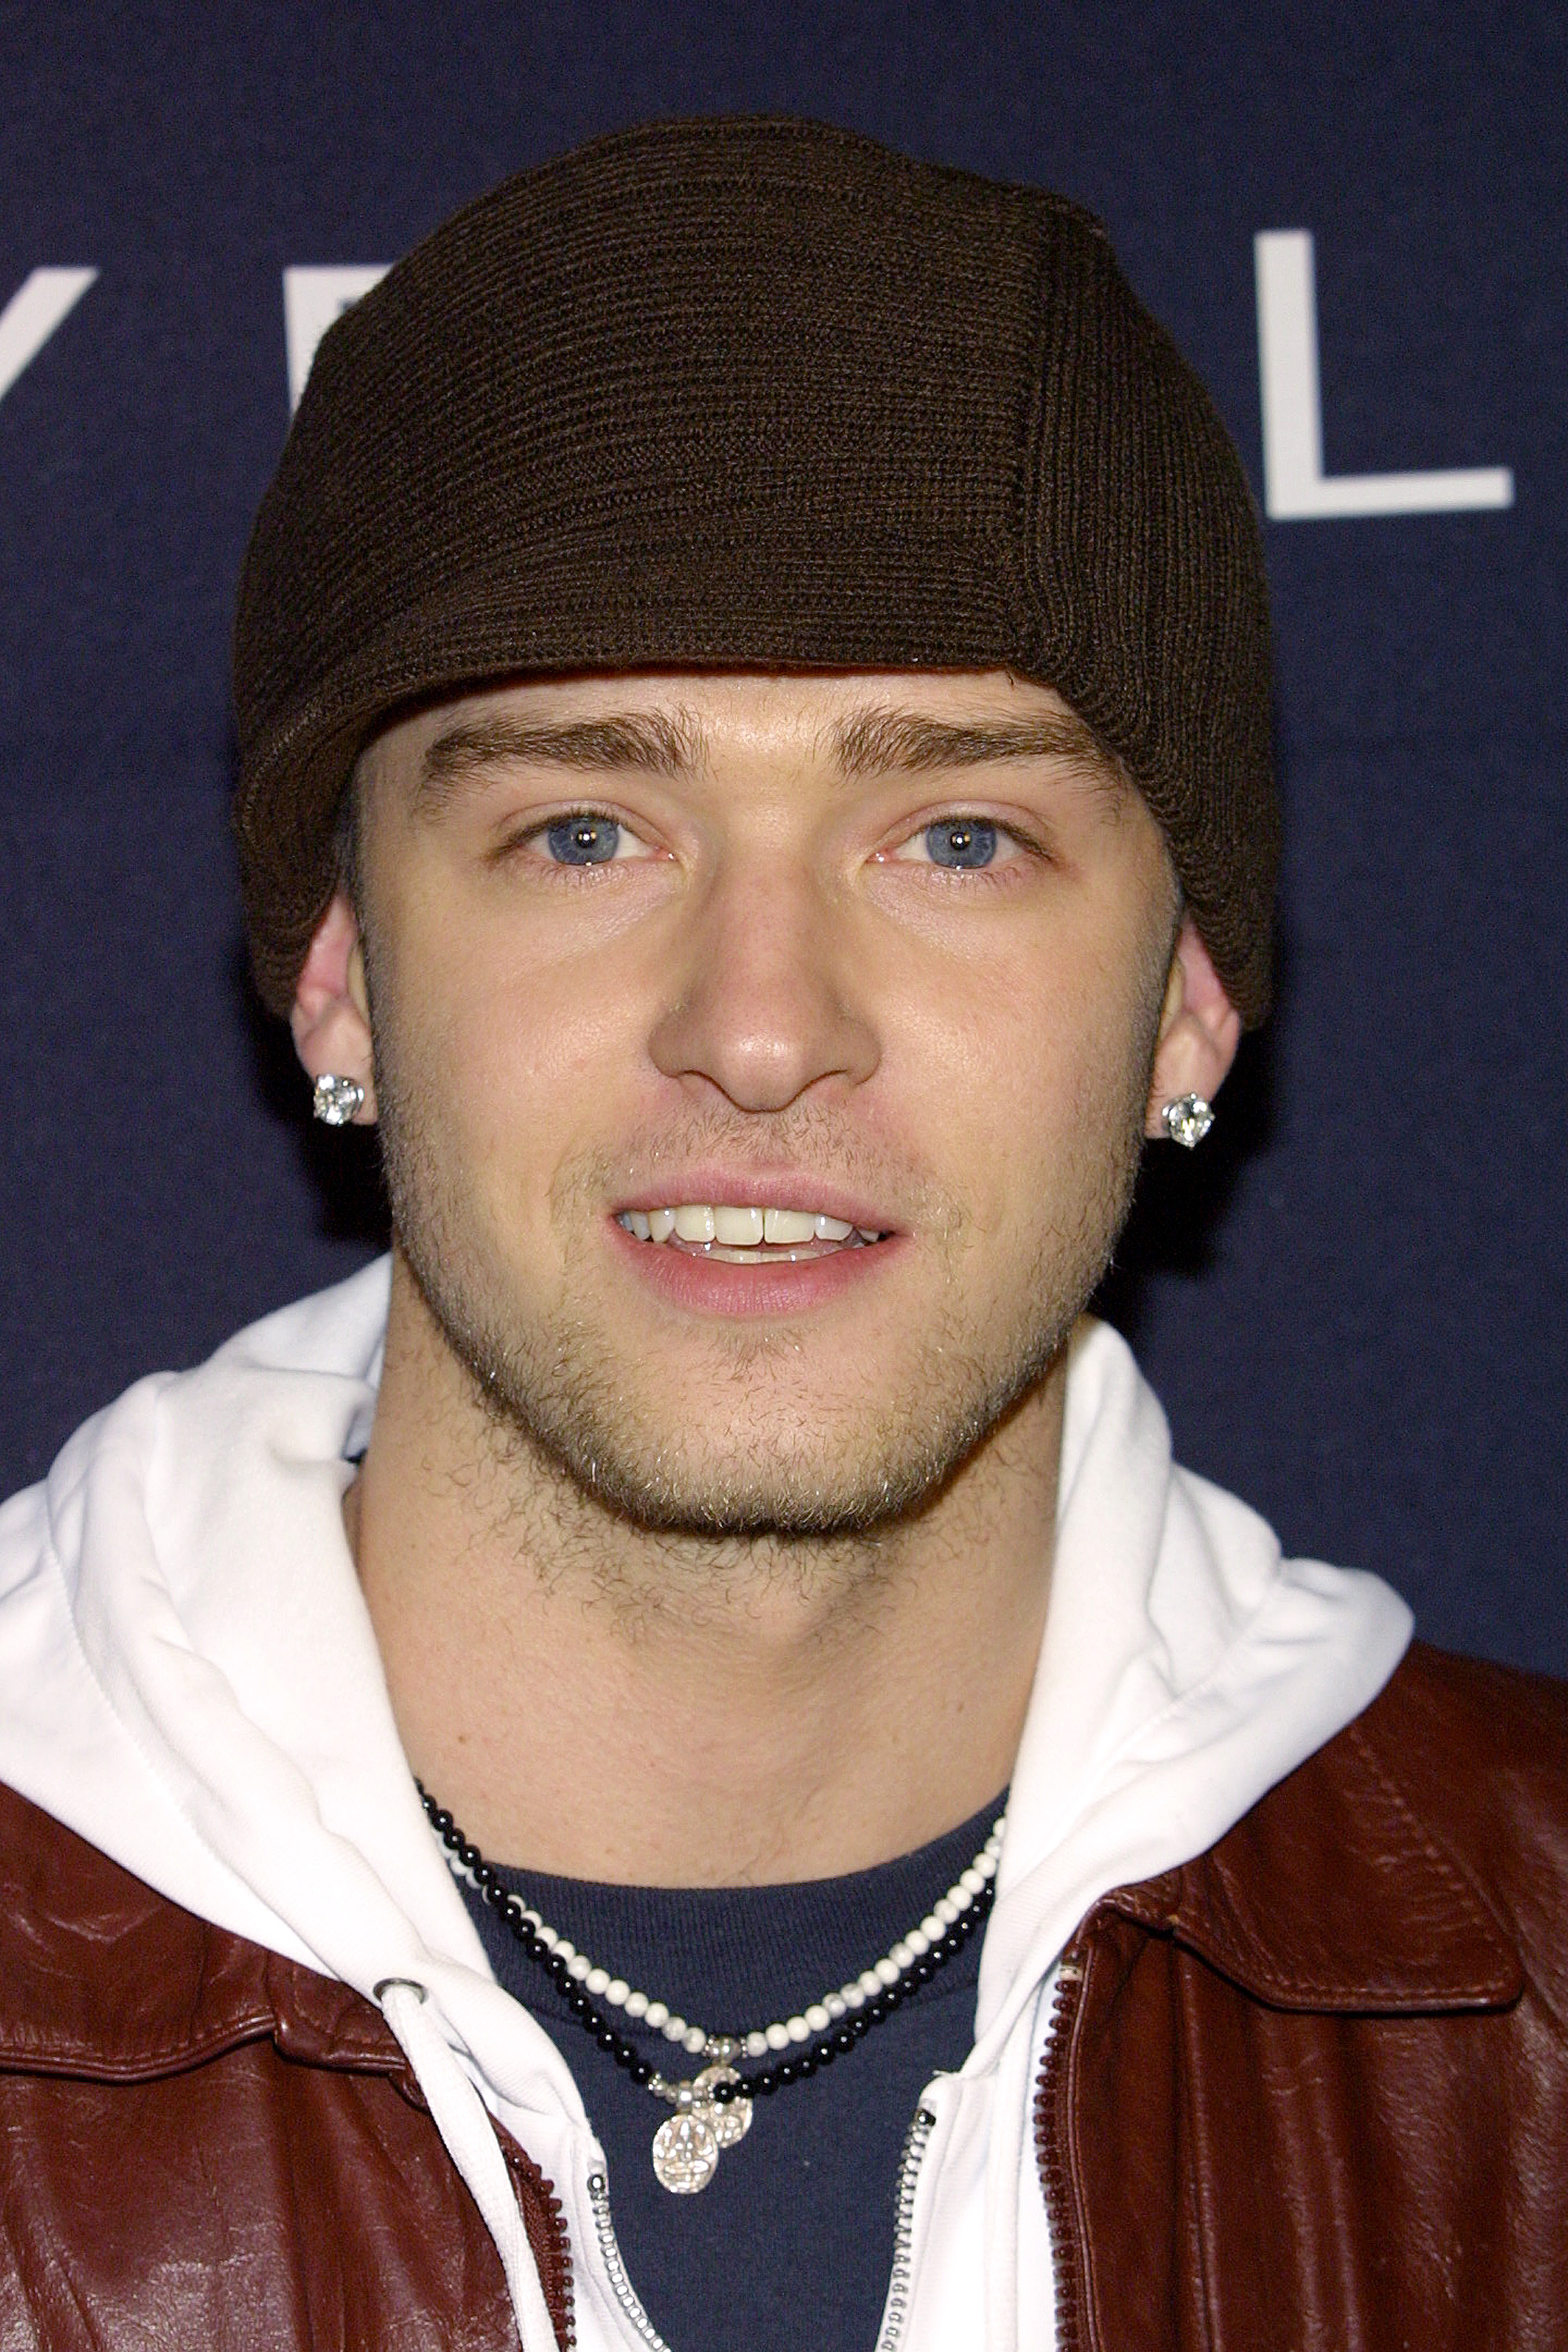 Justin Timberlake at the Teen People and Universal Records Party in Hollywood, California on January 13, 2003. | Source: Getty Images